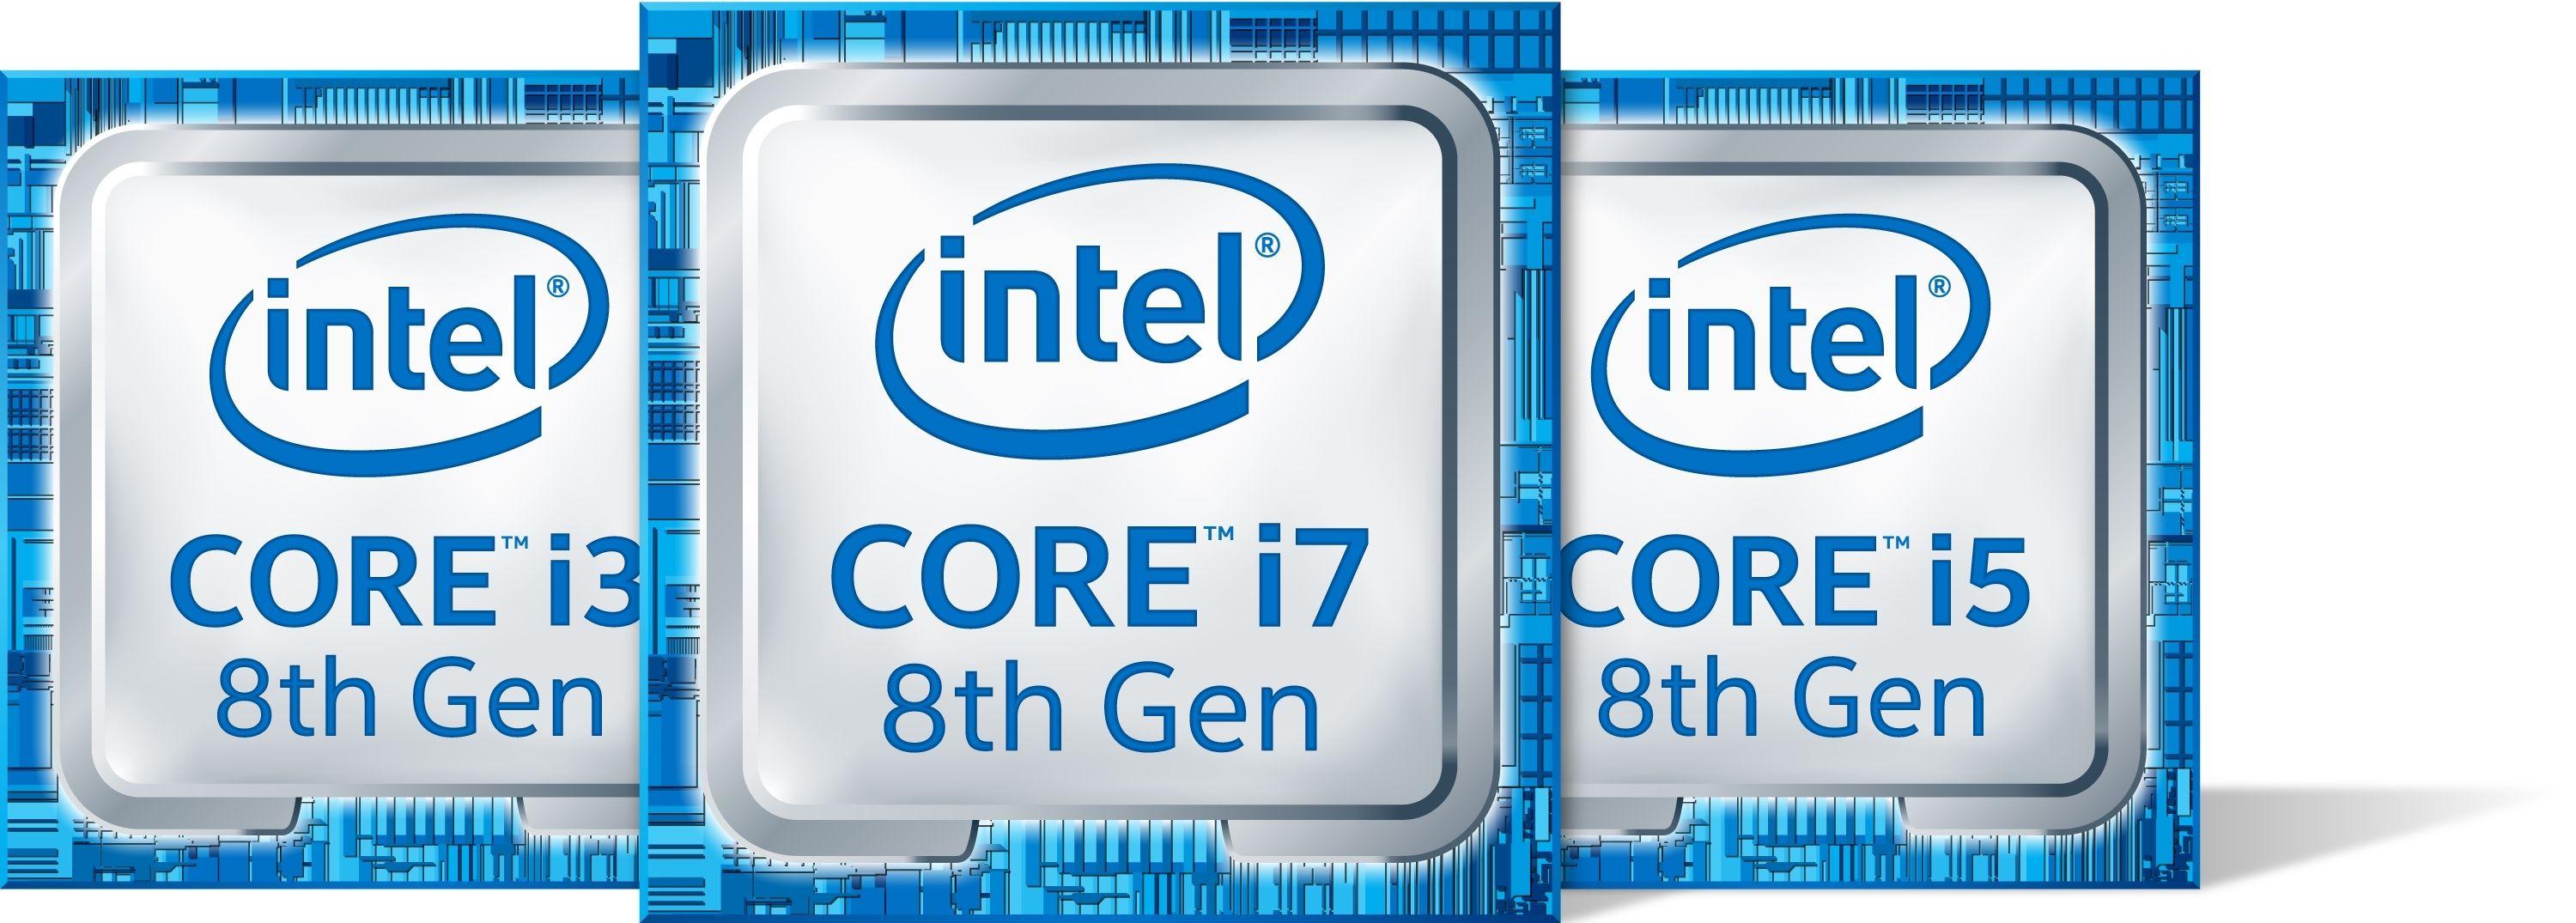 New Intel Logo - New 8th Gen Intel Core Processors: Simplifying Today, Opening the ...